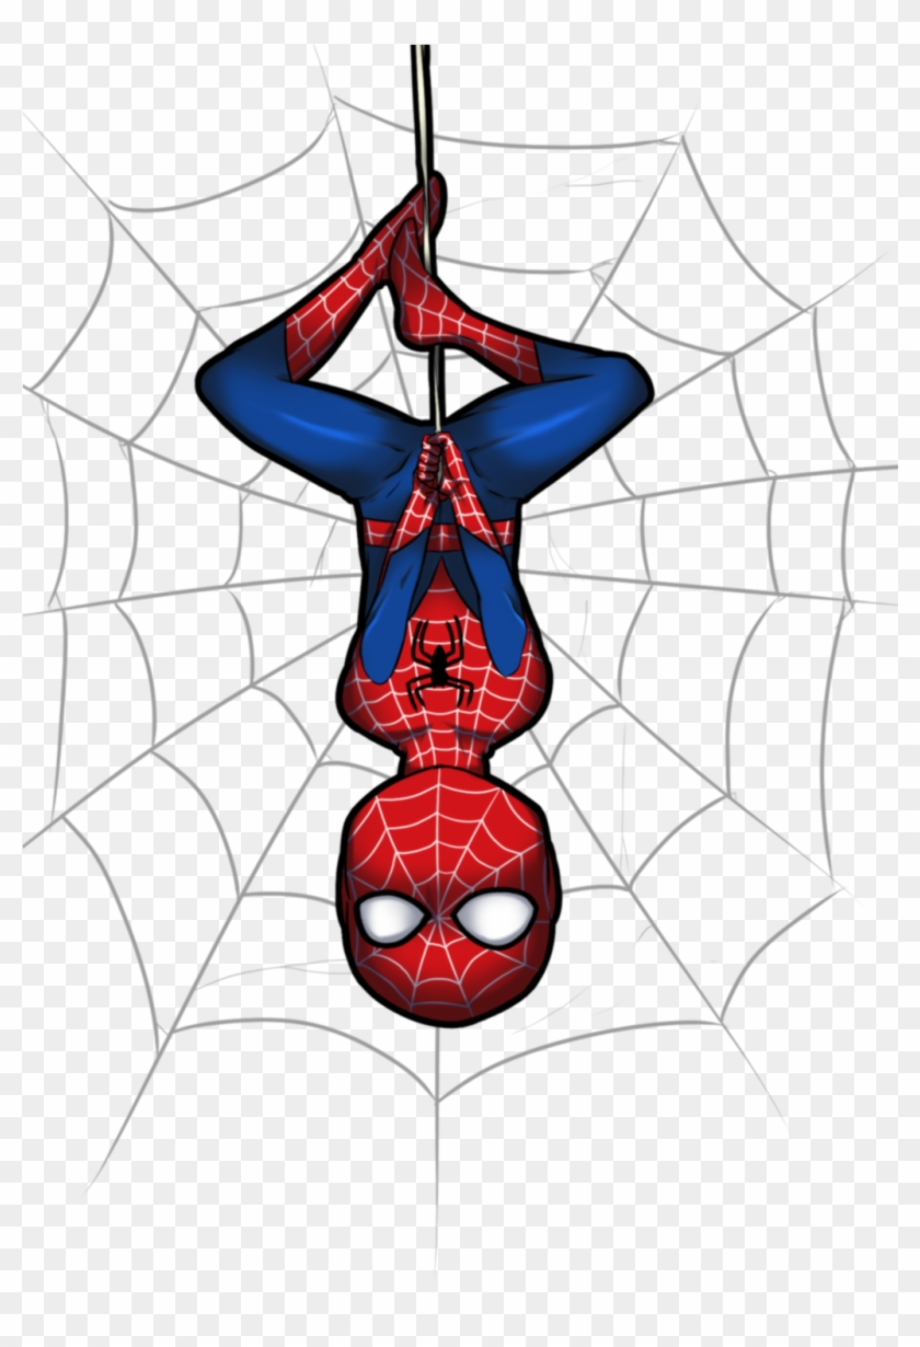 Download High Quality spiderman clipart little Transparent PNG Images